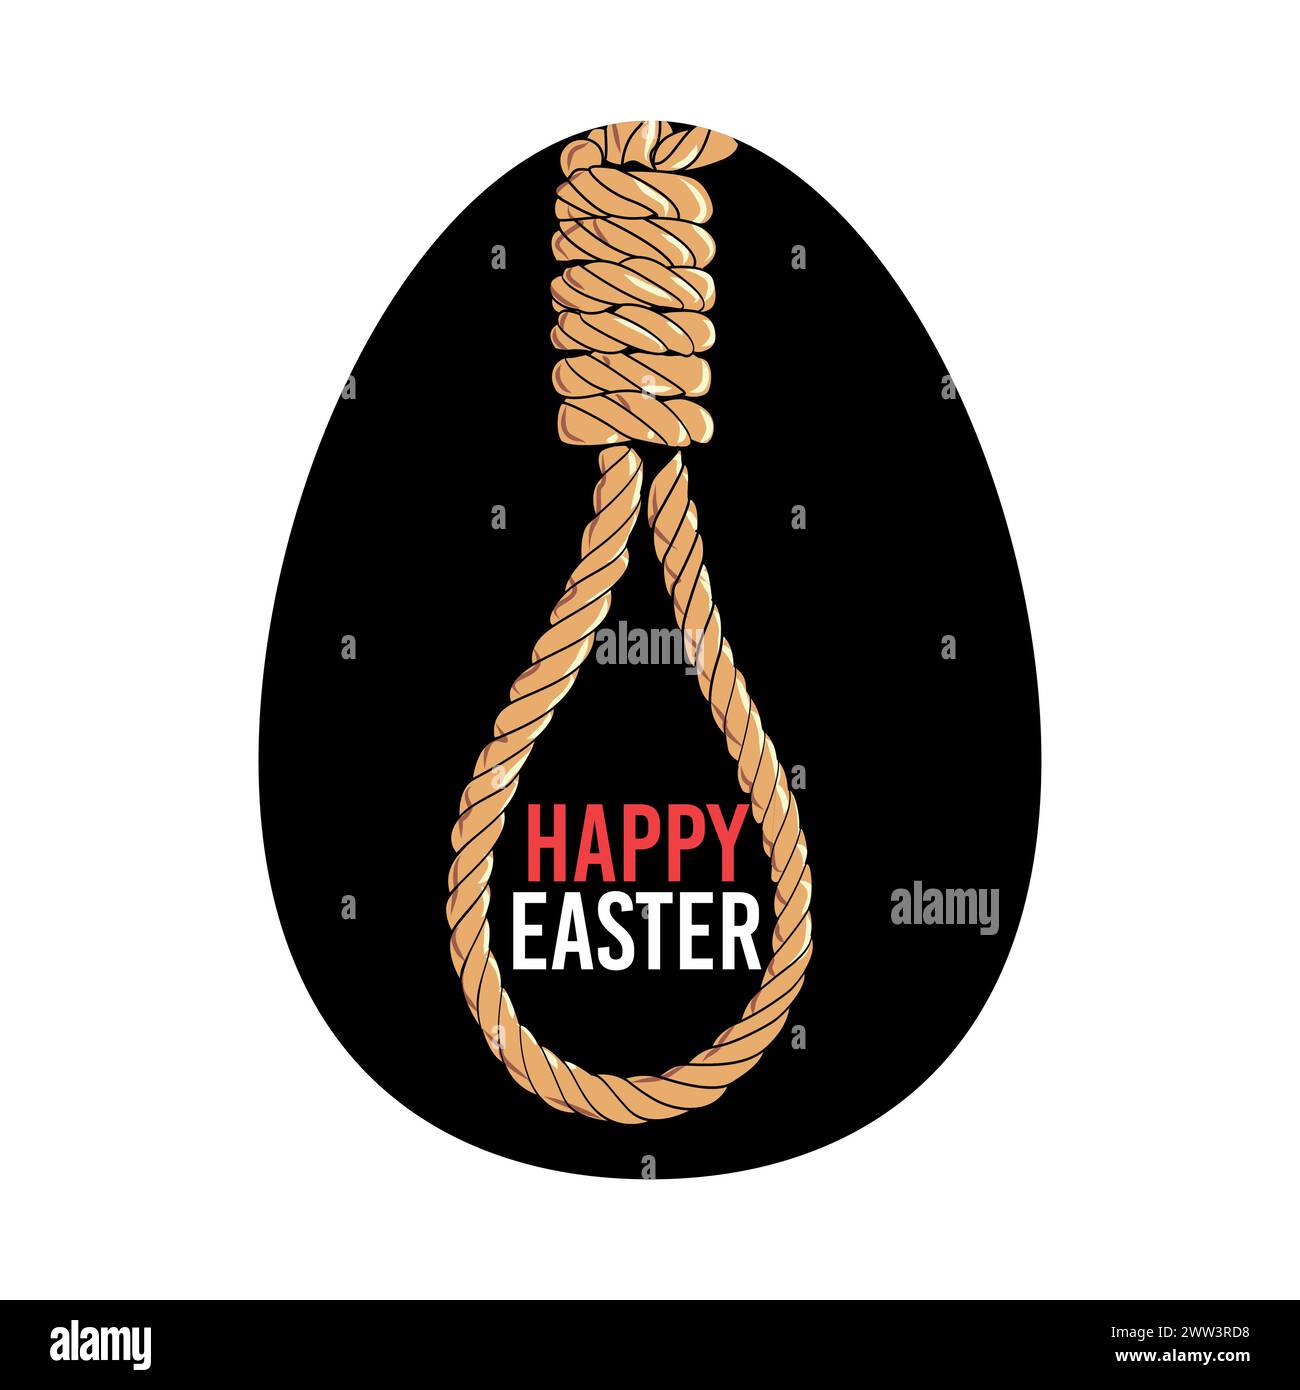 Happy Easter. Design for a t-shirt with an Easter egg silhouette and a hangman's noose.. sstkEaster Stock Vector